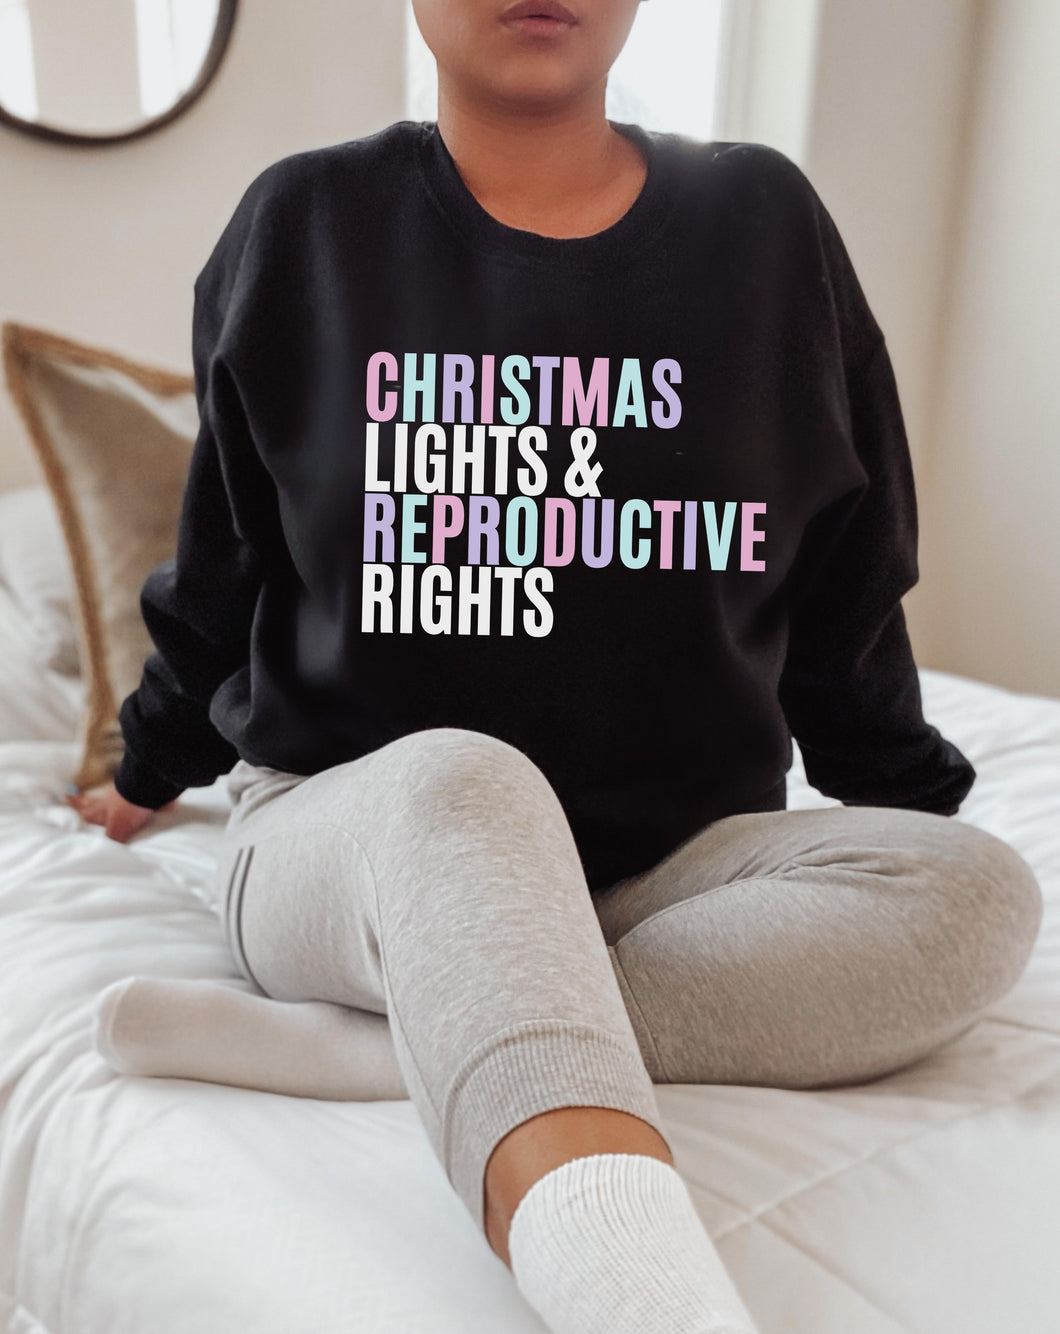 Christmas lights and reproductive rights